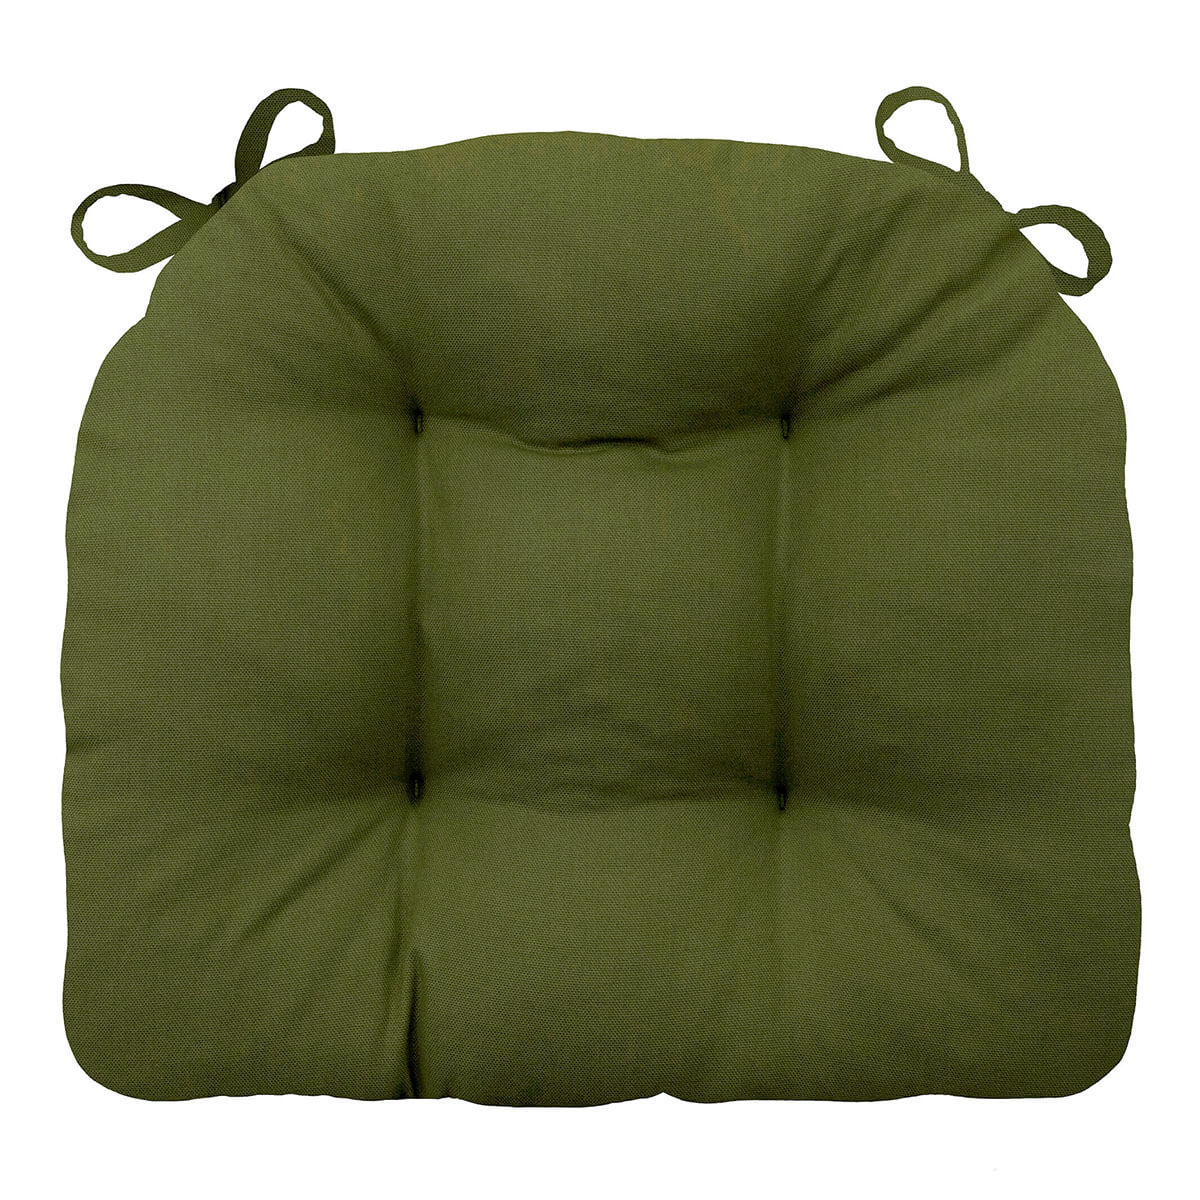 Cotton Duck Boxwood Green Extra-Thick Chair Pad